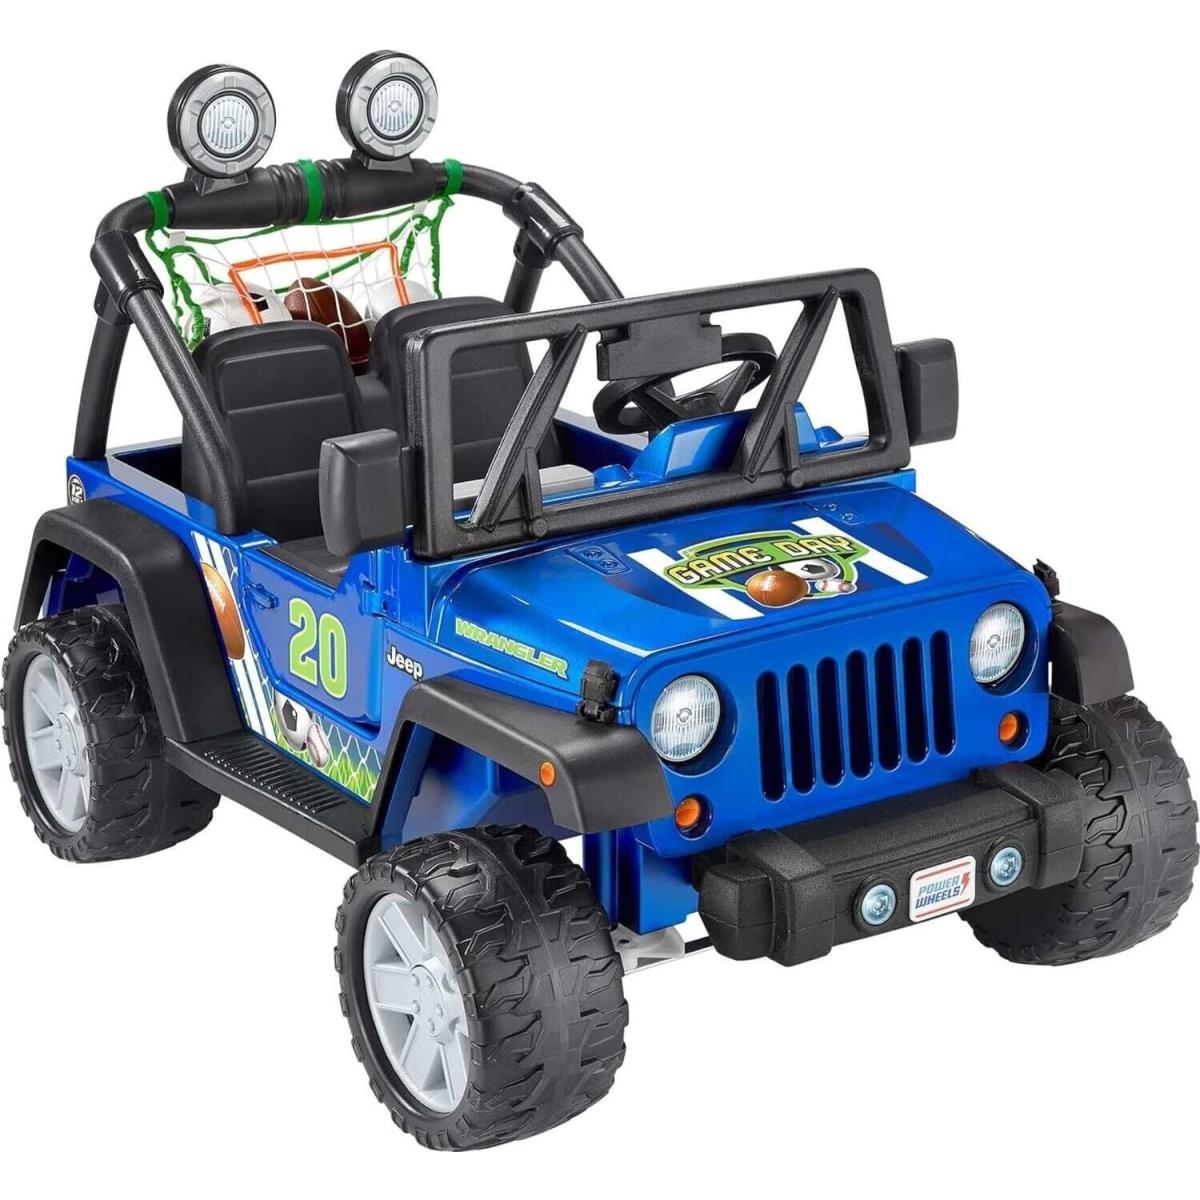 Power Wheels Ride-on Toy Gameday Jeep Wrangler Battery-powered Distresss Box